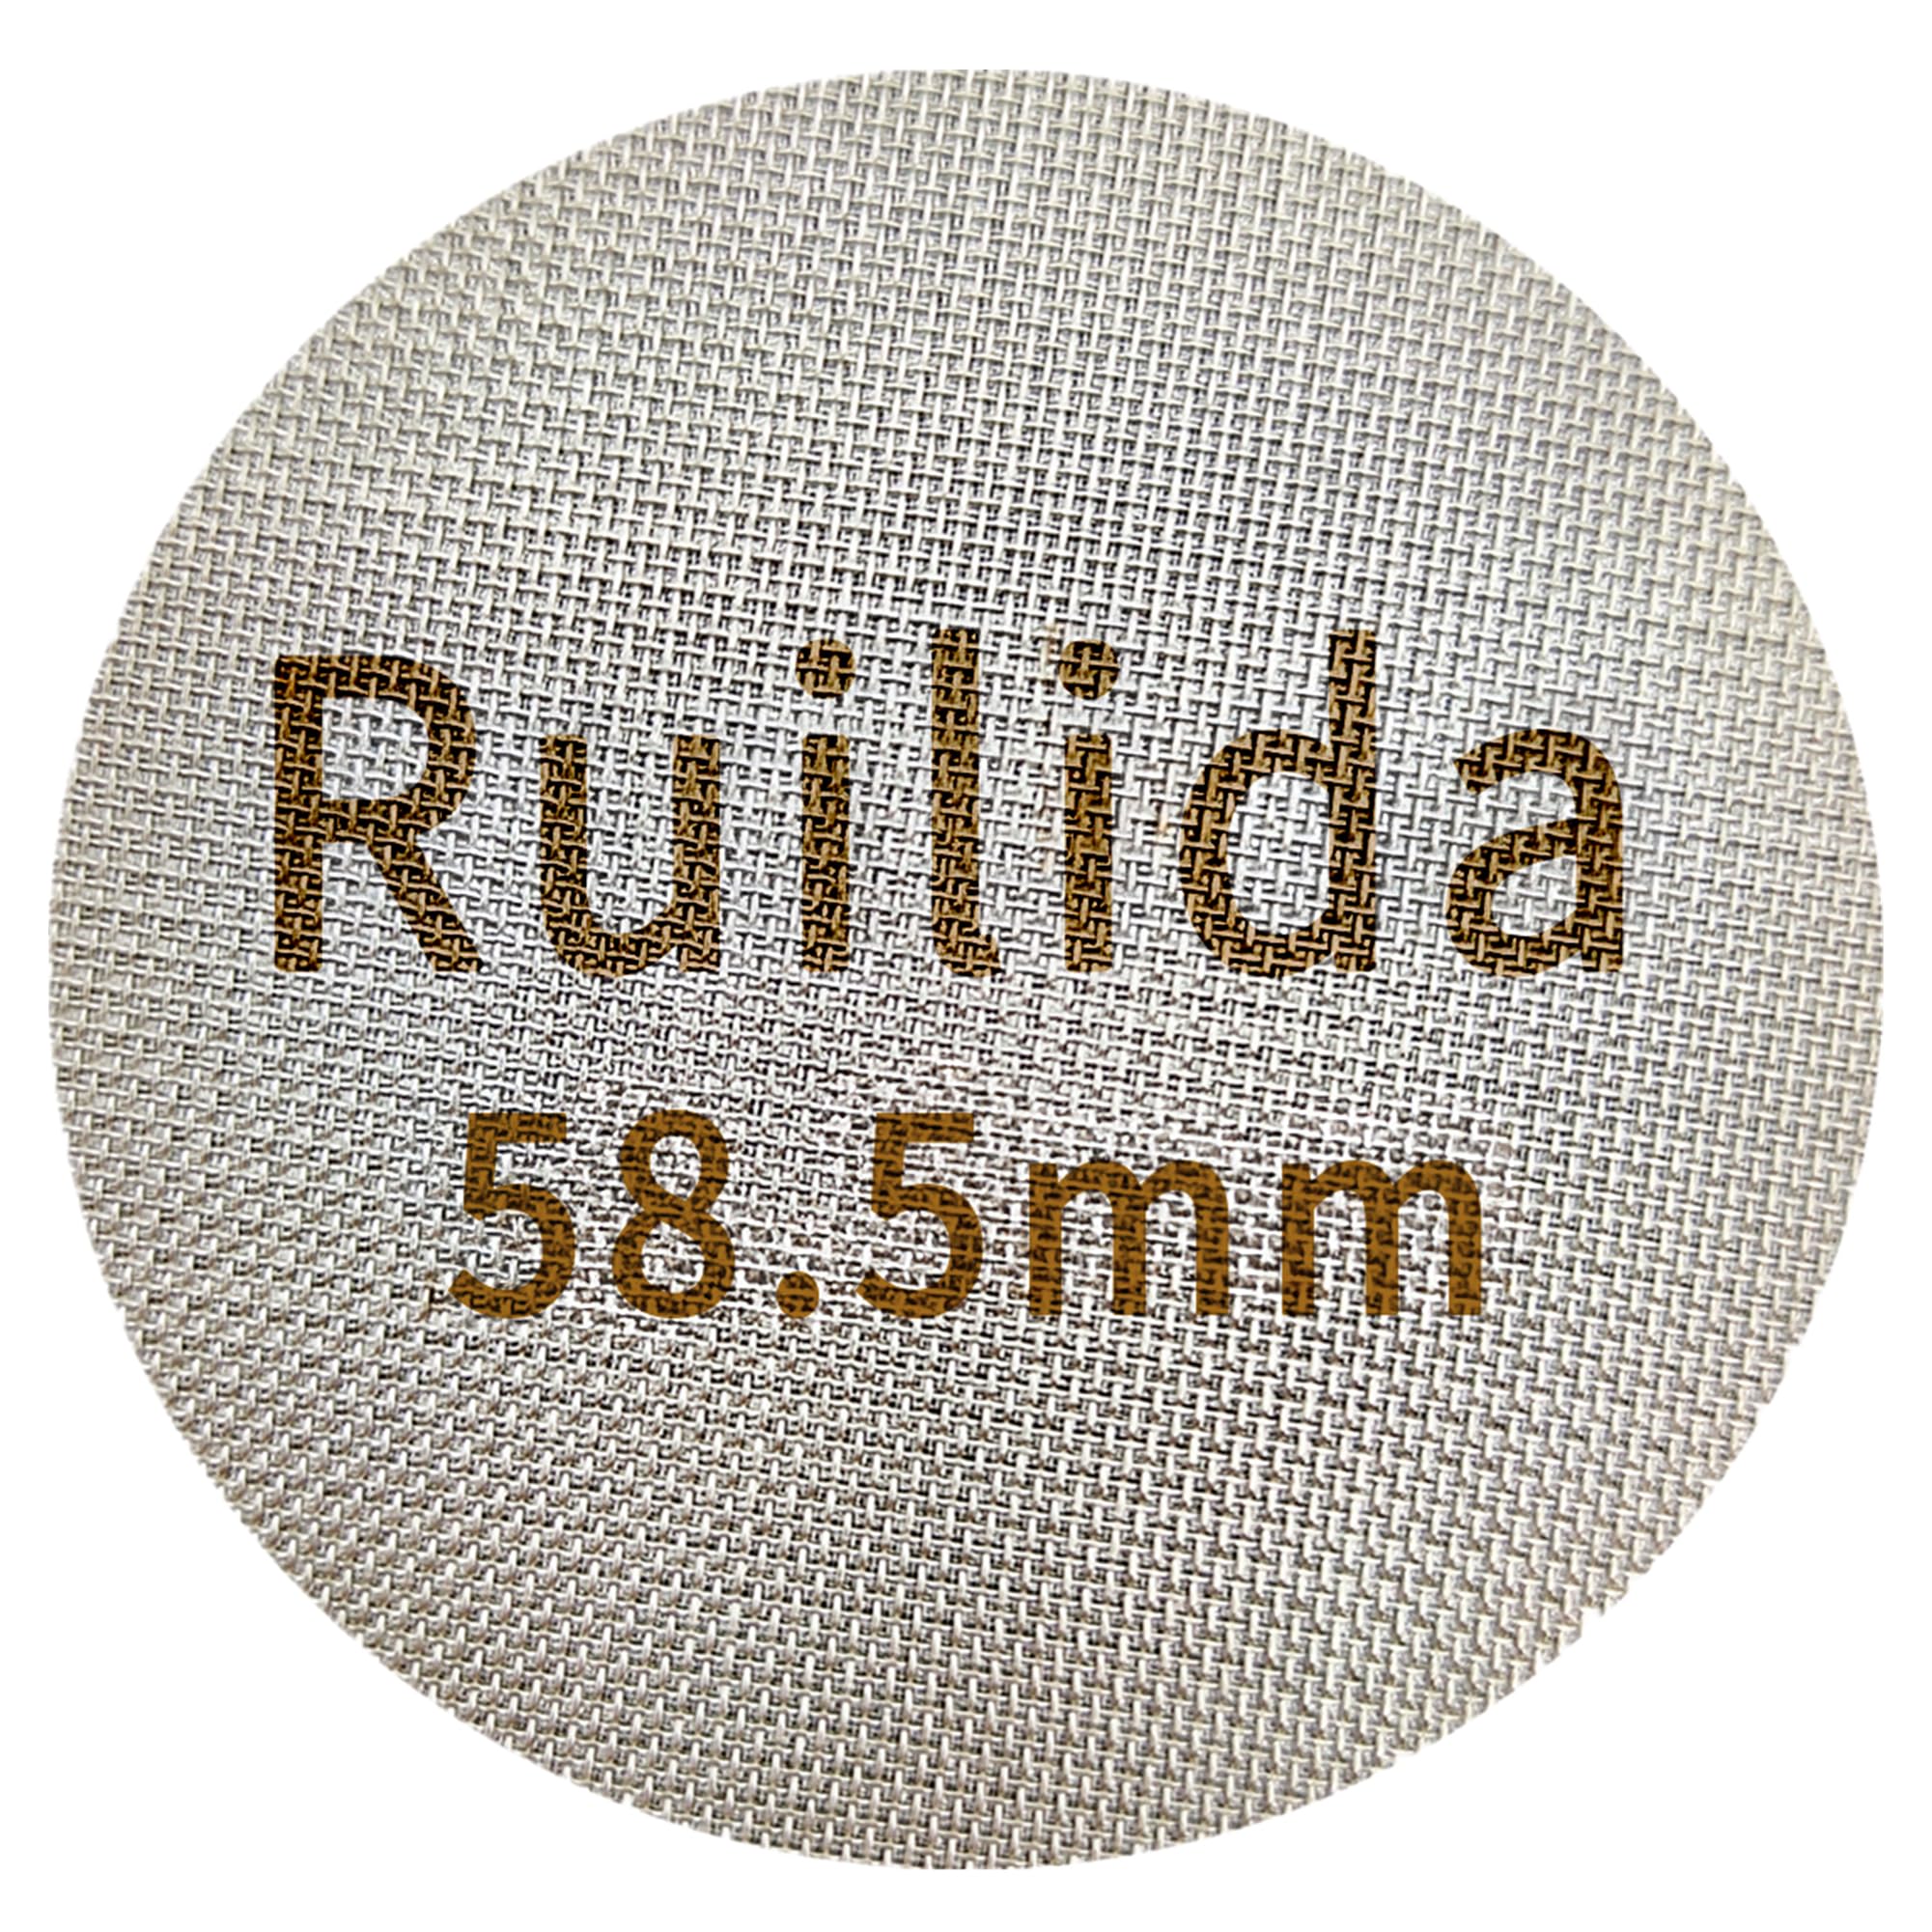 Ruilida Espresso Puck Screen 58.5mm, Reusable 1.7mm Thickness 150μm 316 Stainless Steel Professional Barista Coffee Filter Mesh 